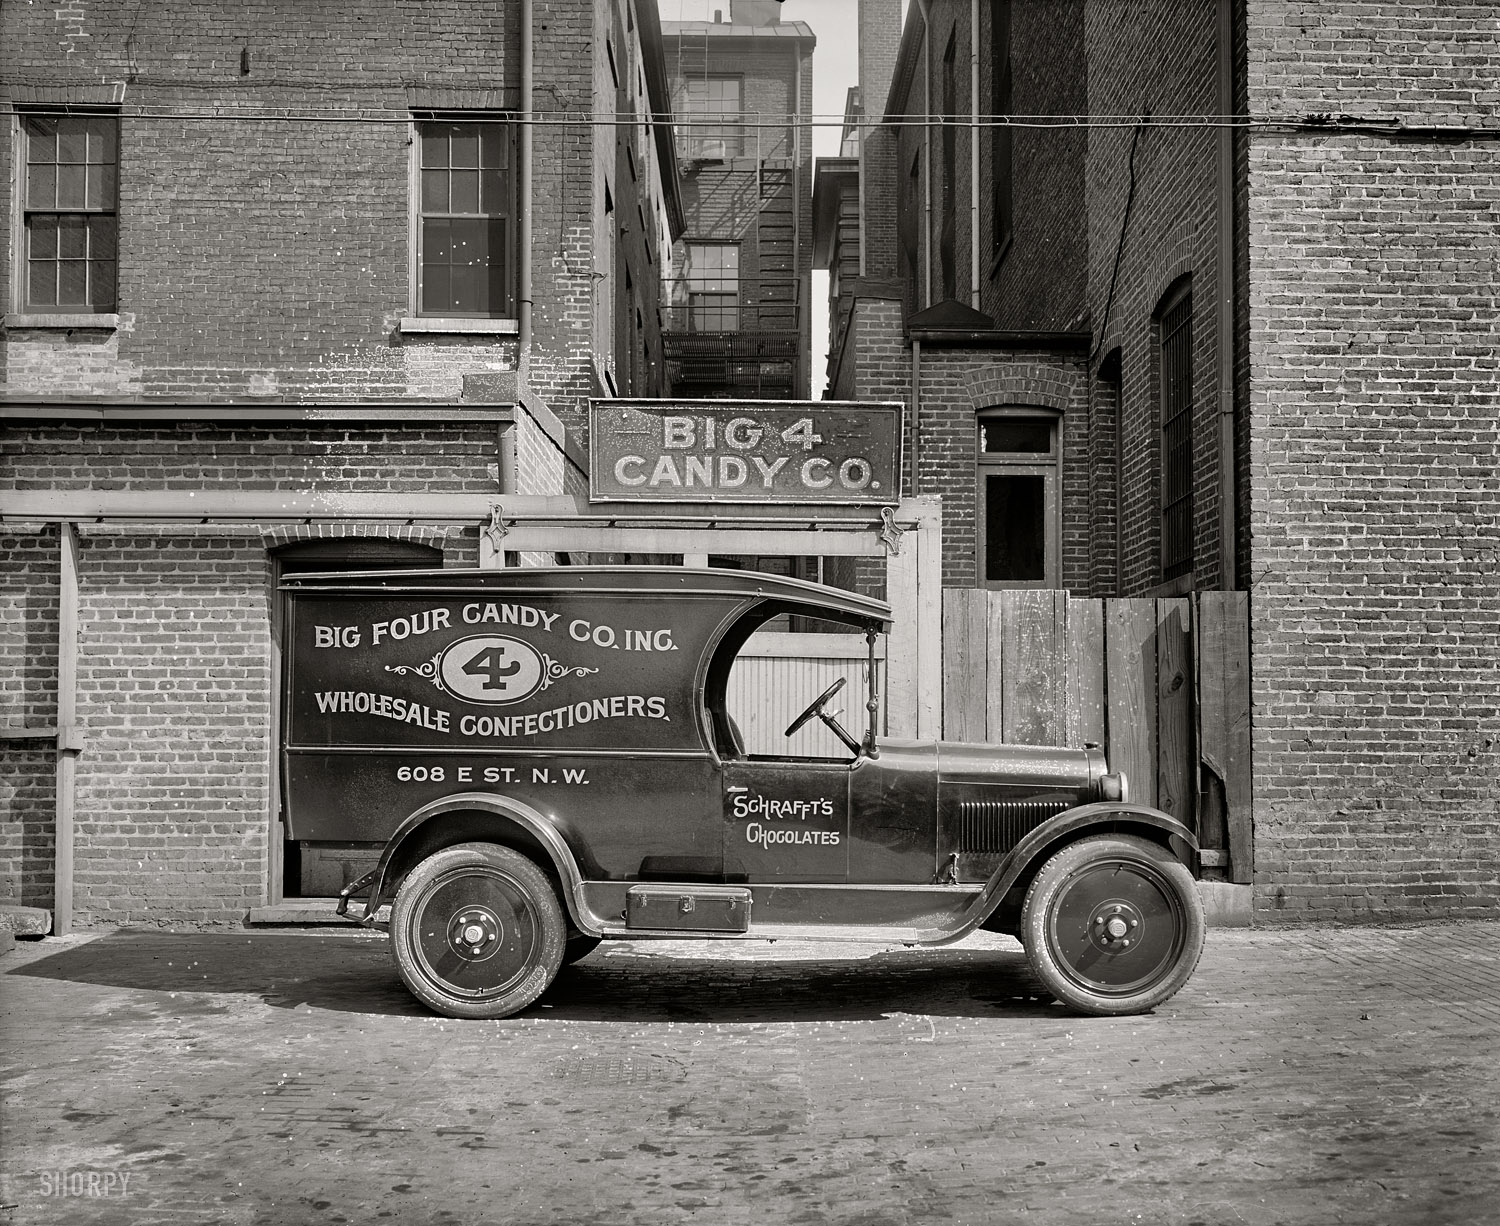 1926. "Semmes Motor Co., Schrafft's truck." A Dodge truck in Big 4 Candy livery at 608 E Street N.W., Washington. National Photo glass negative. View full size.